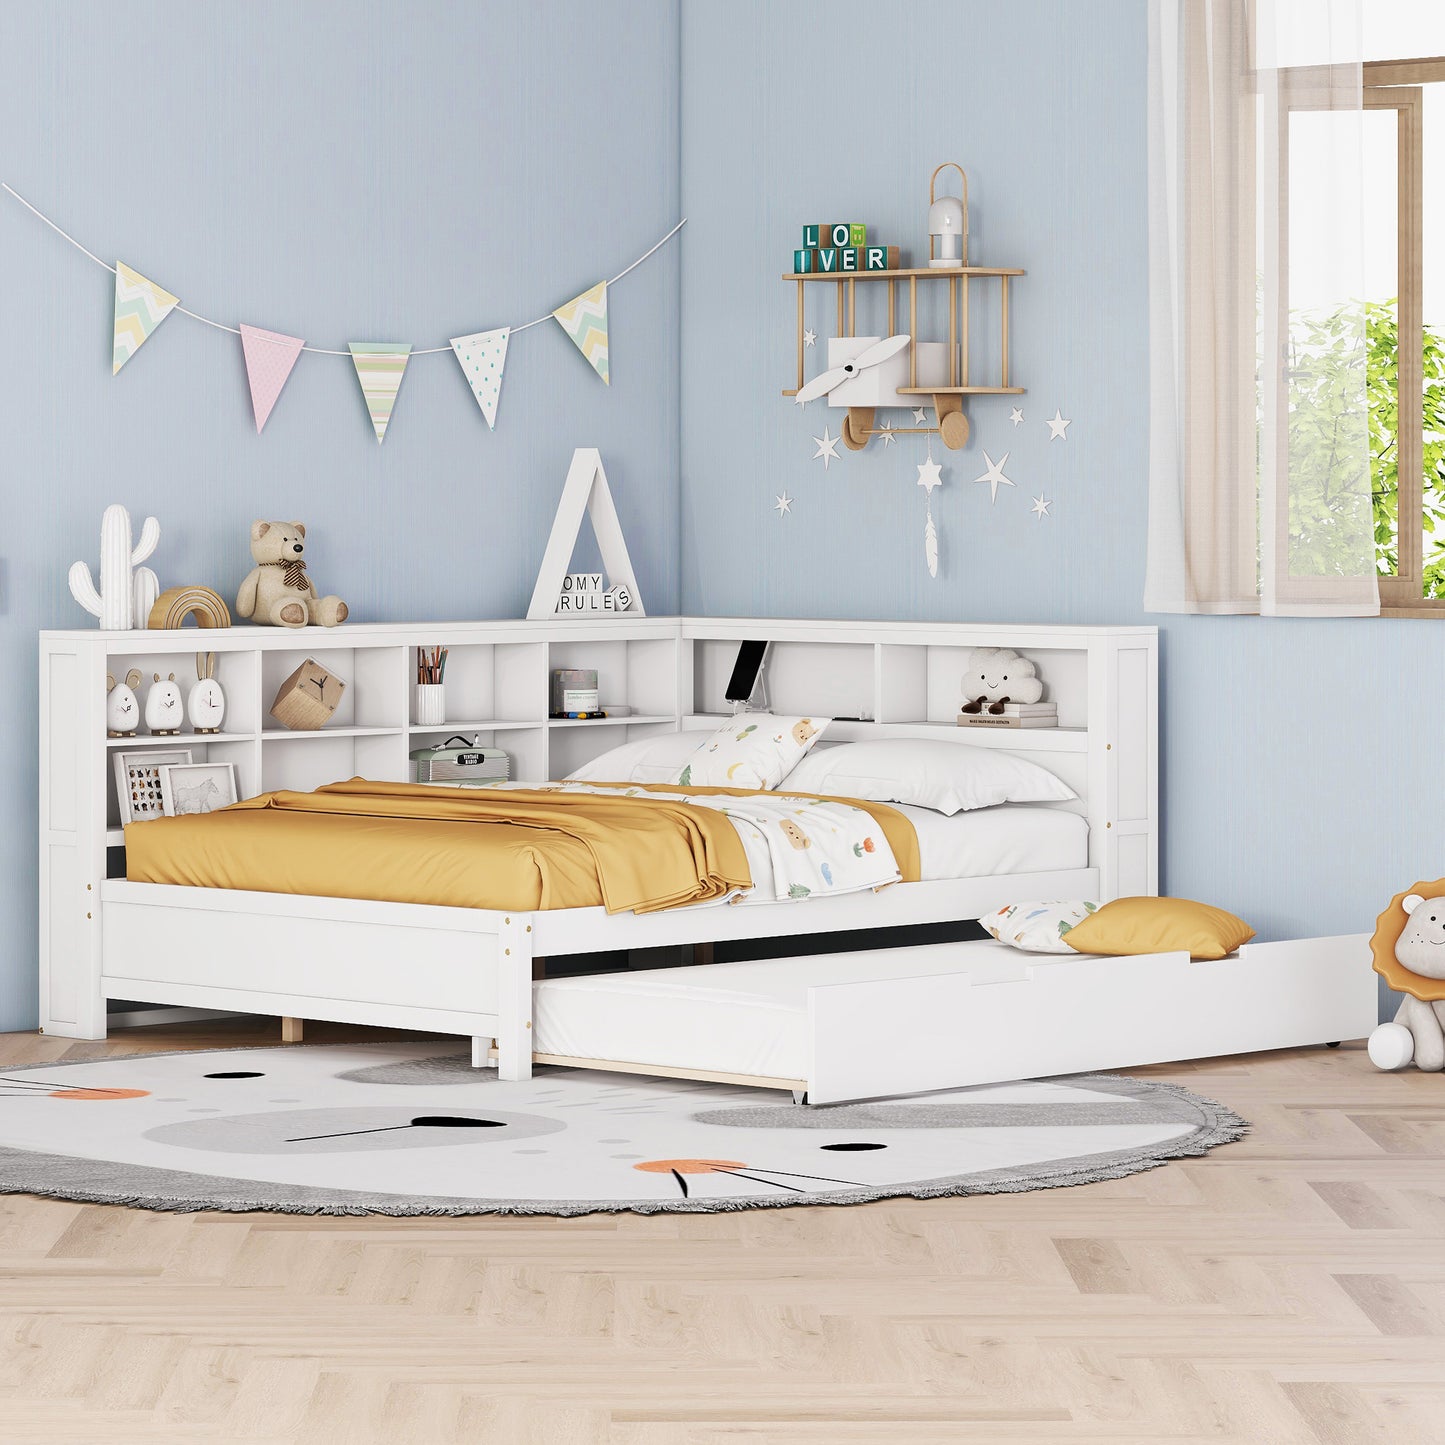 Wooden Full Size DayBed with Twin Size Trundle, DayBed with Storage Shelf and USB Charging Ports,White